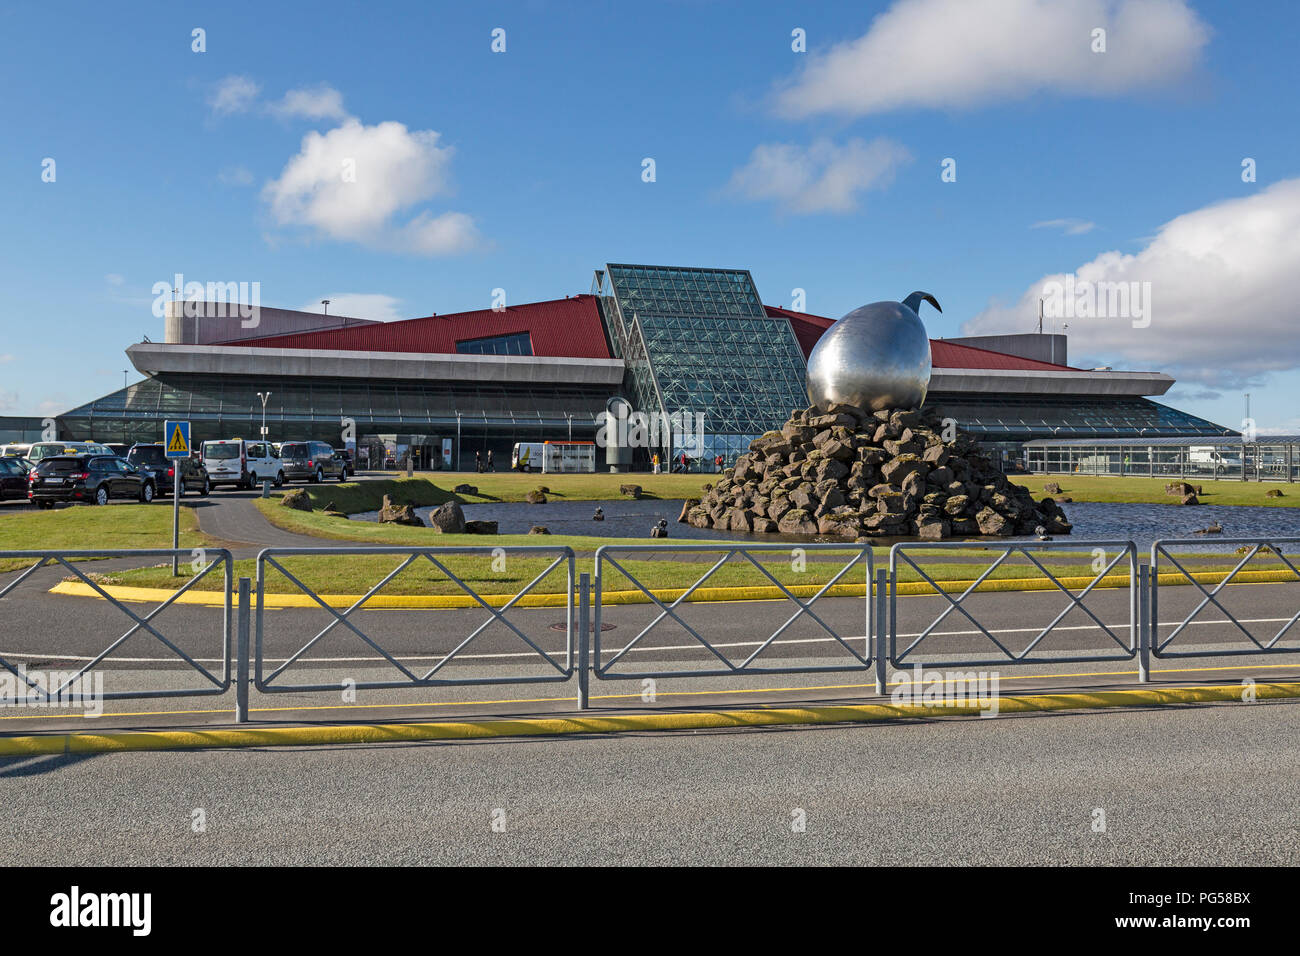 Keflavik International Airport near Reykjavik in Iceland. abstract sculpture called The Jet Nest by Magnus Tomasson in front. Stock Photo